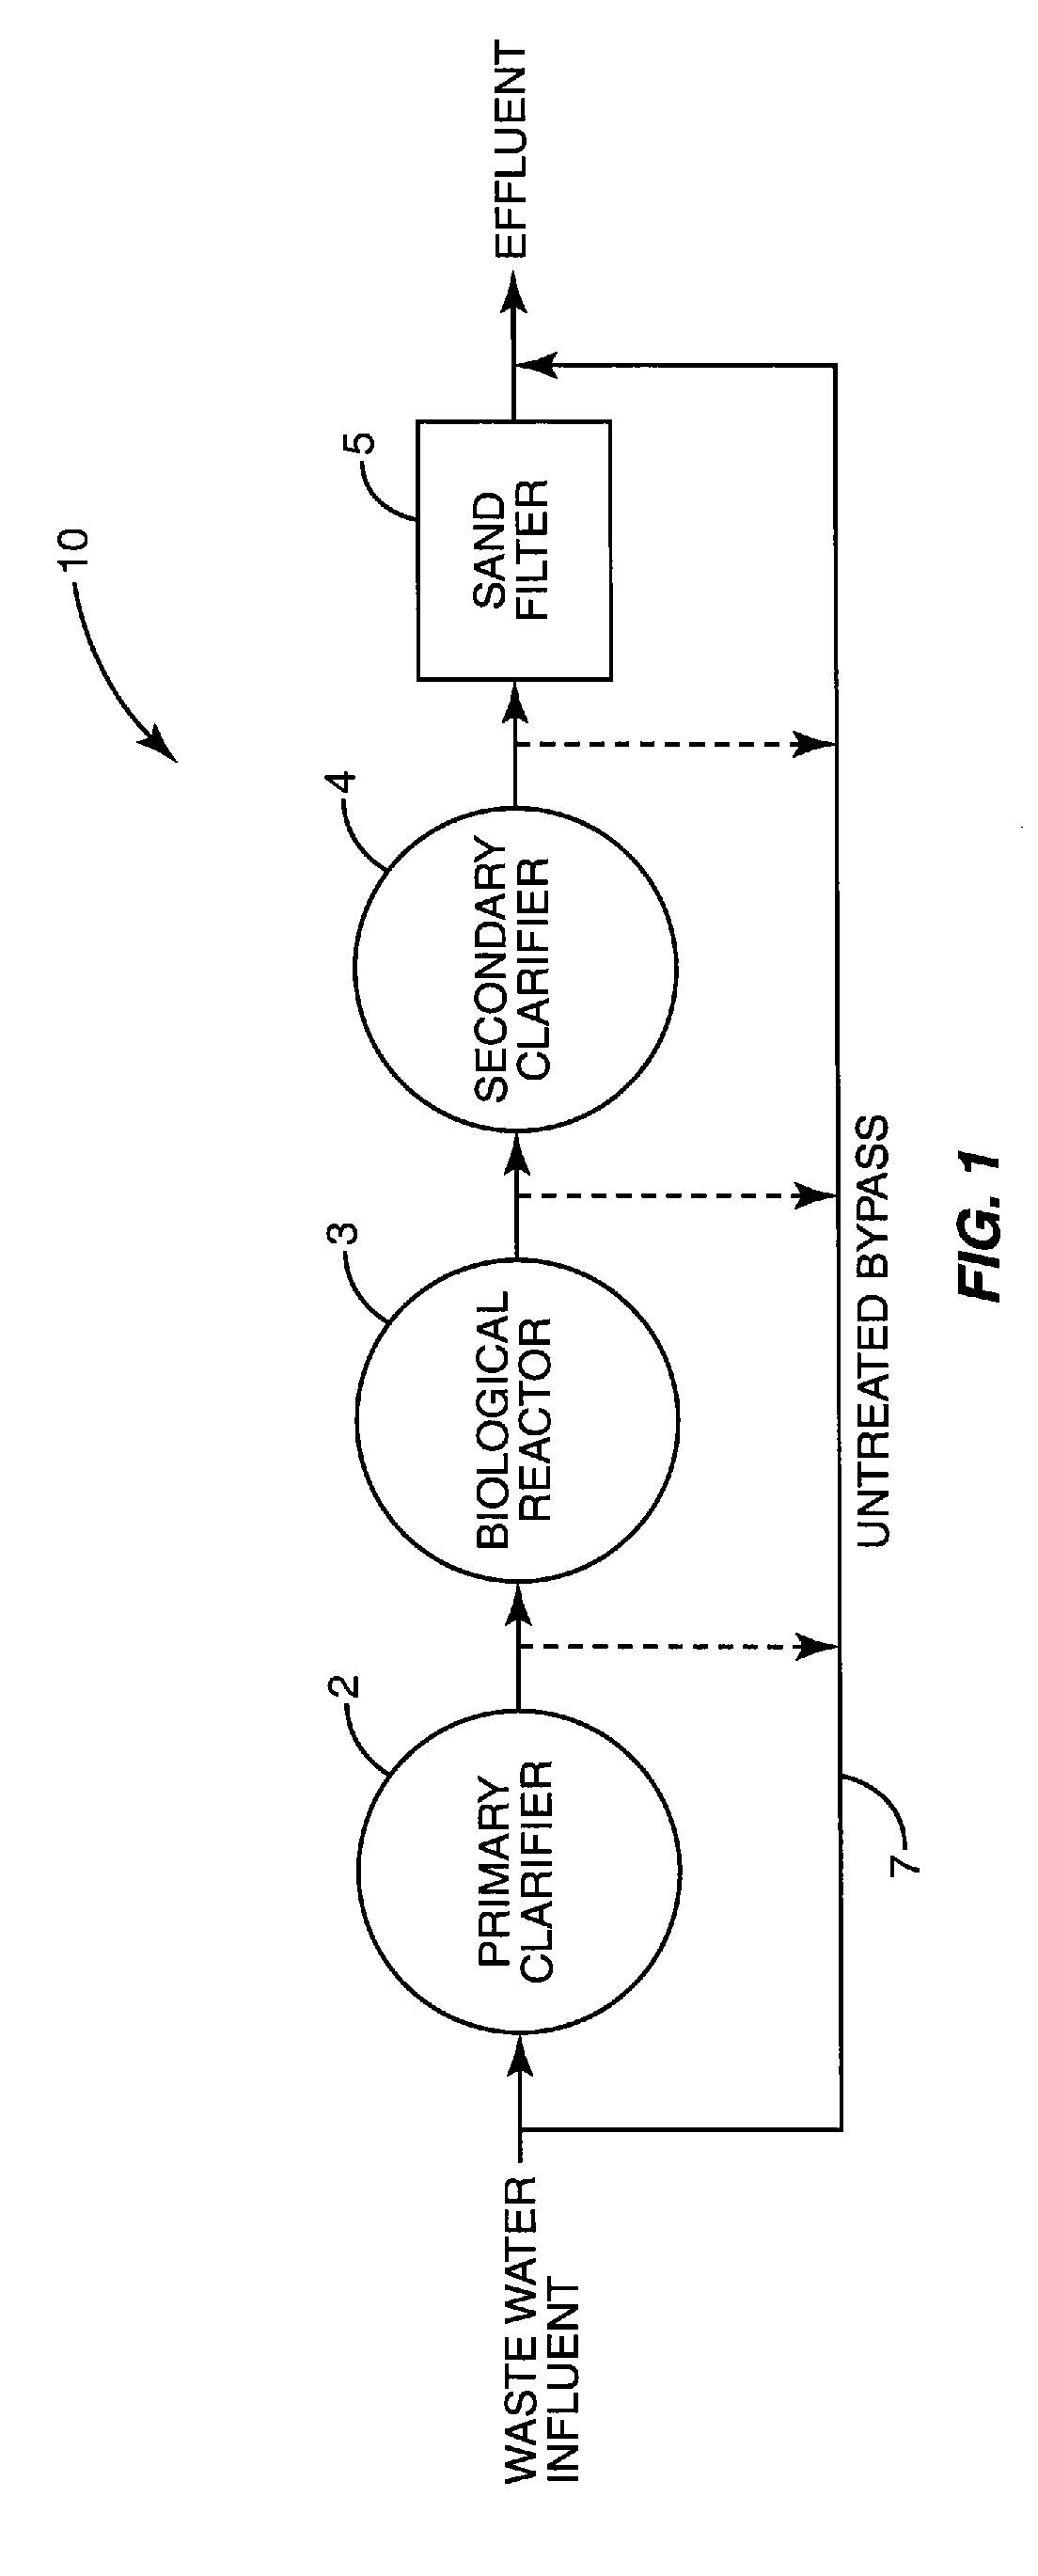 Method and System for Retrofitting An Existing Water Treatment System